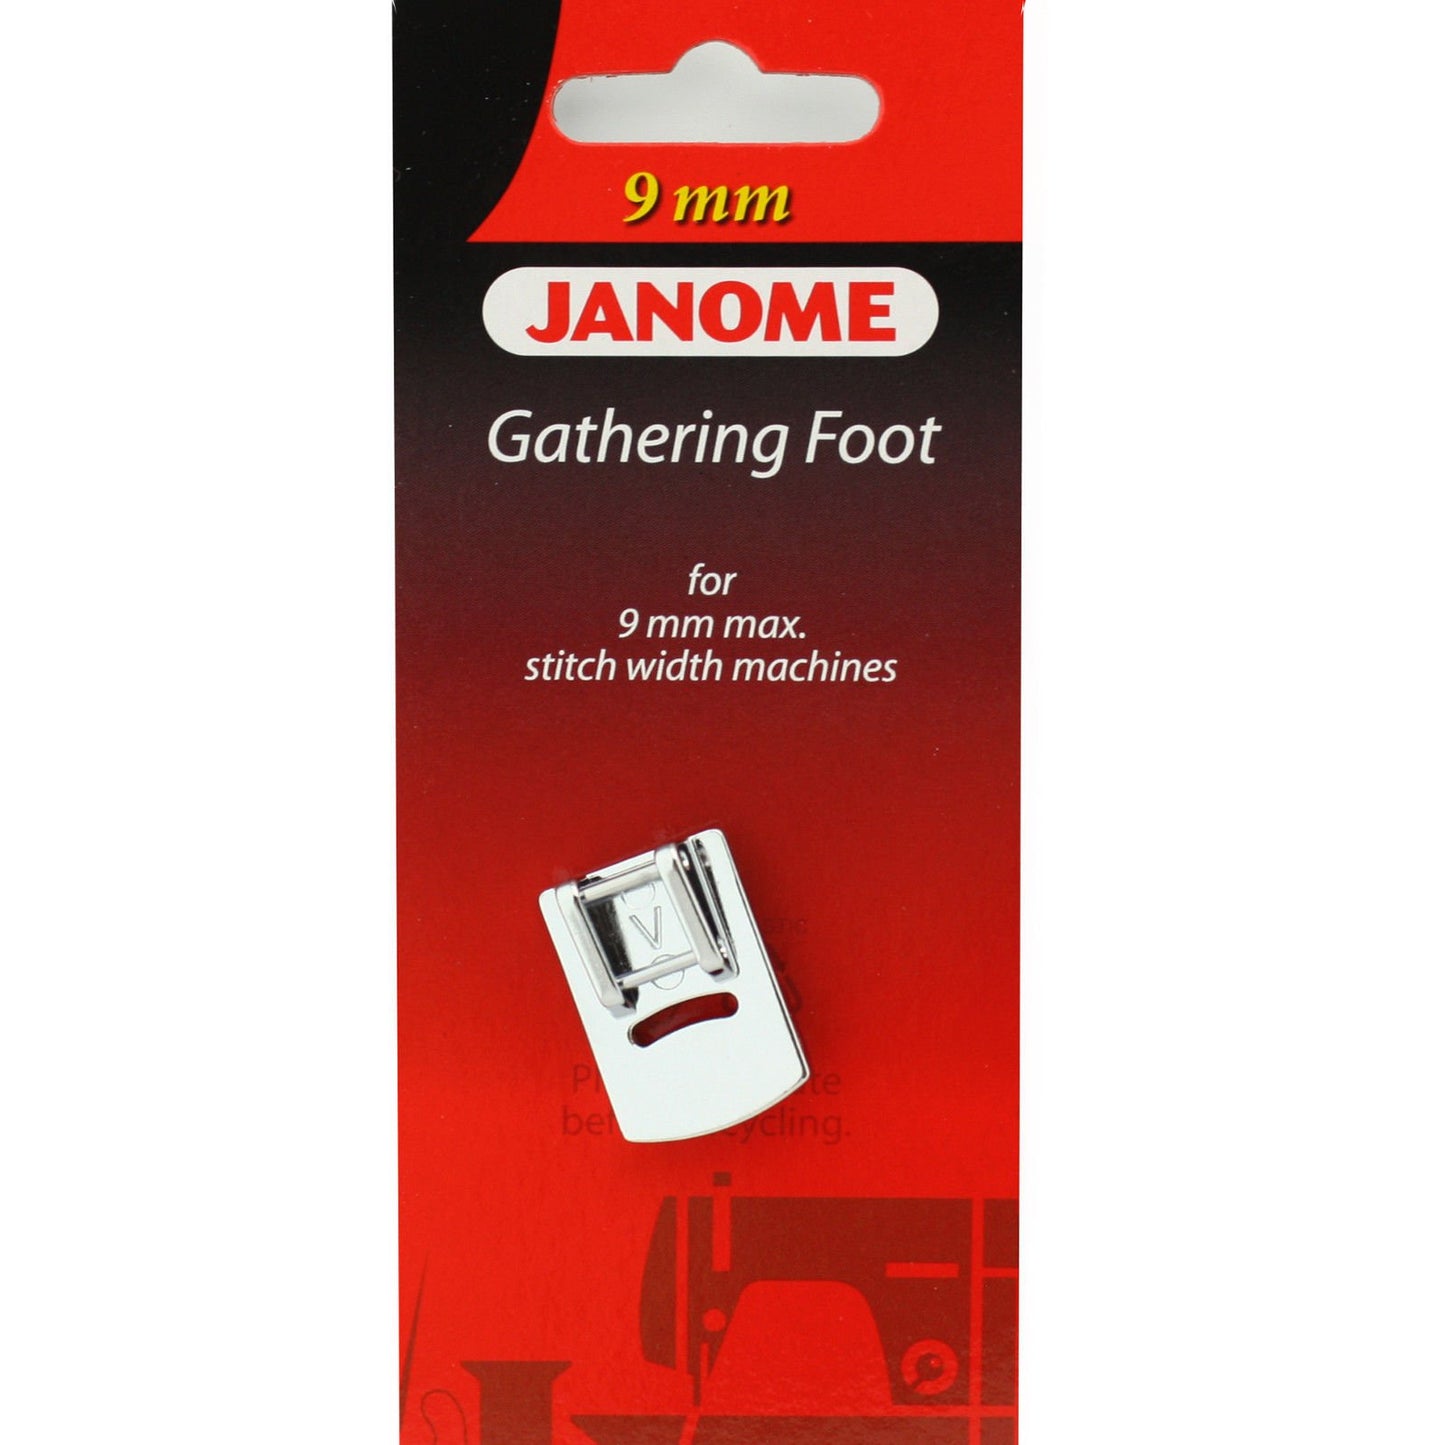 Janome Gathering Foot 9mm